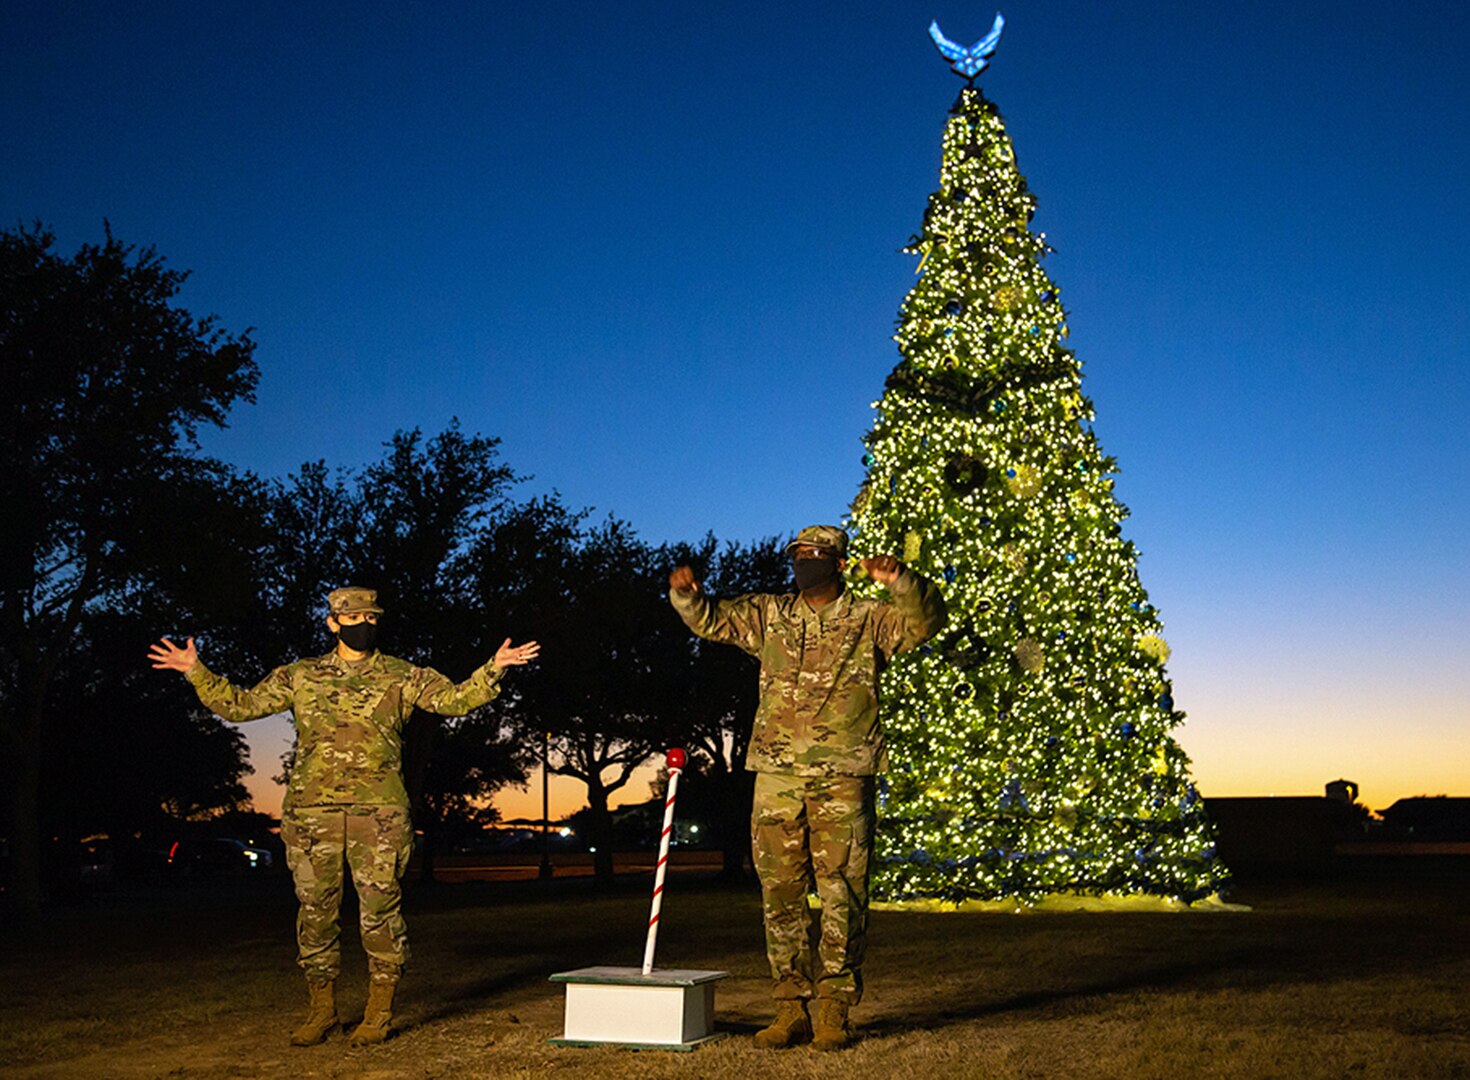 Air Force Brig. Gen. Caroline M. Miller (left), 502d Air Base Wing and Joint Base San Antonio commander, and U.S. Air Force Chief Master Sgt. Wendell Snider (right) 502nd Air Base Wing and Joint Base San Antonio command chief, participate in the live streamed tree-lighting ceremony at JBSA-Lackland Dec. 2.